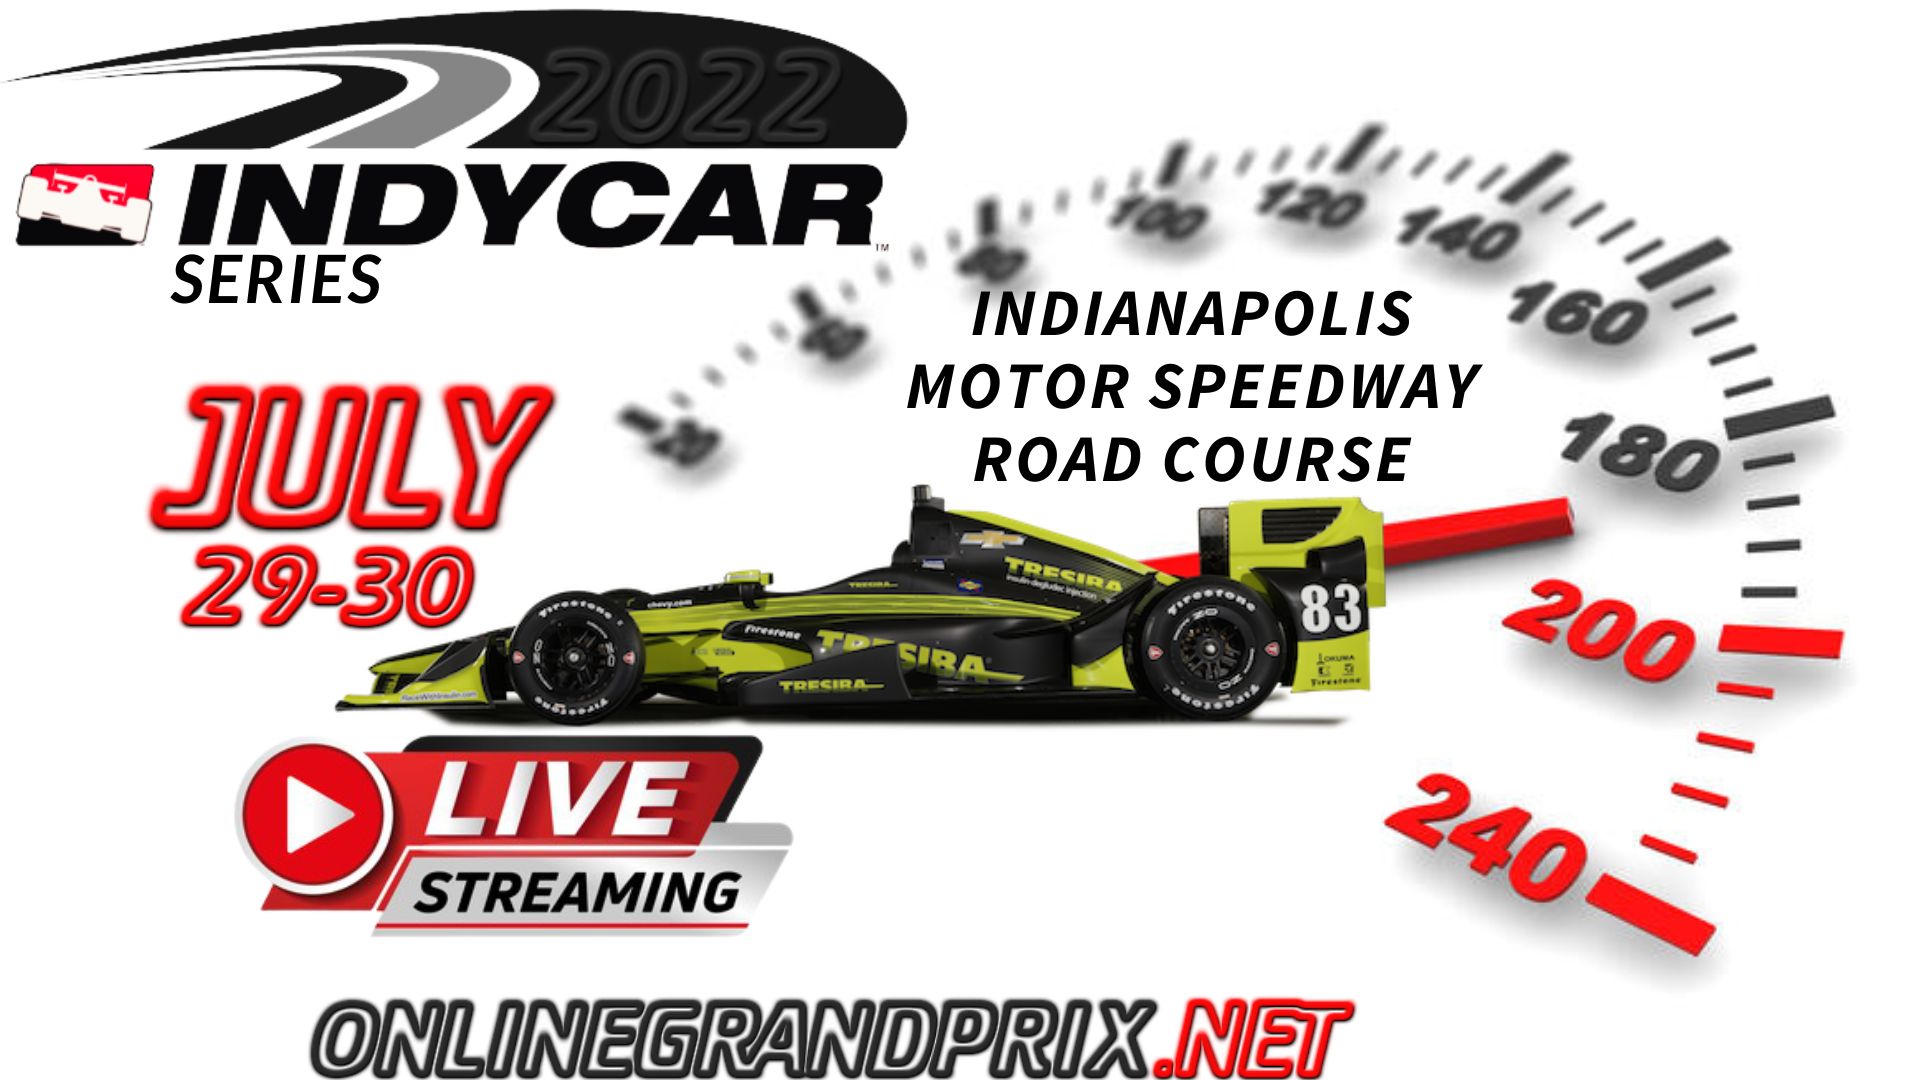 Indianapolis Motor Speedway Road Course GP Live Stream 2022 | INDYCAR